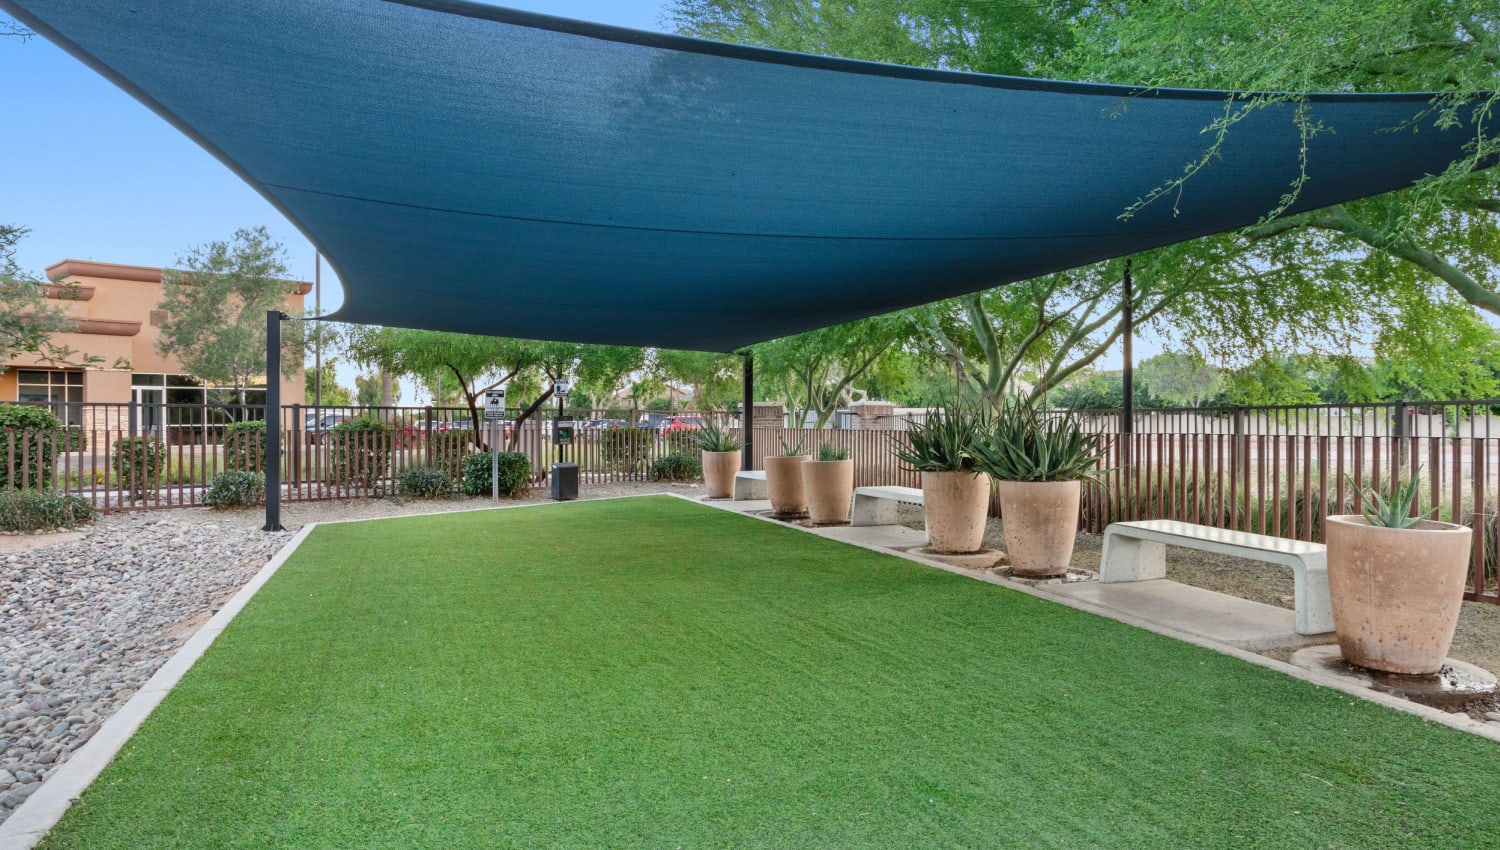 Pet Park area at Town Commons in Gilbert, Arizona